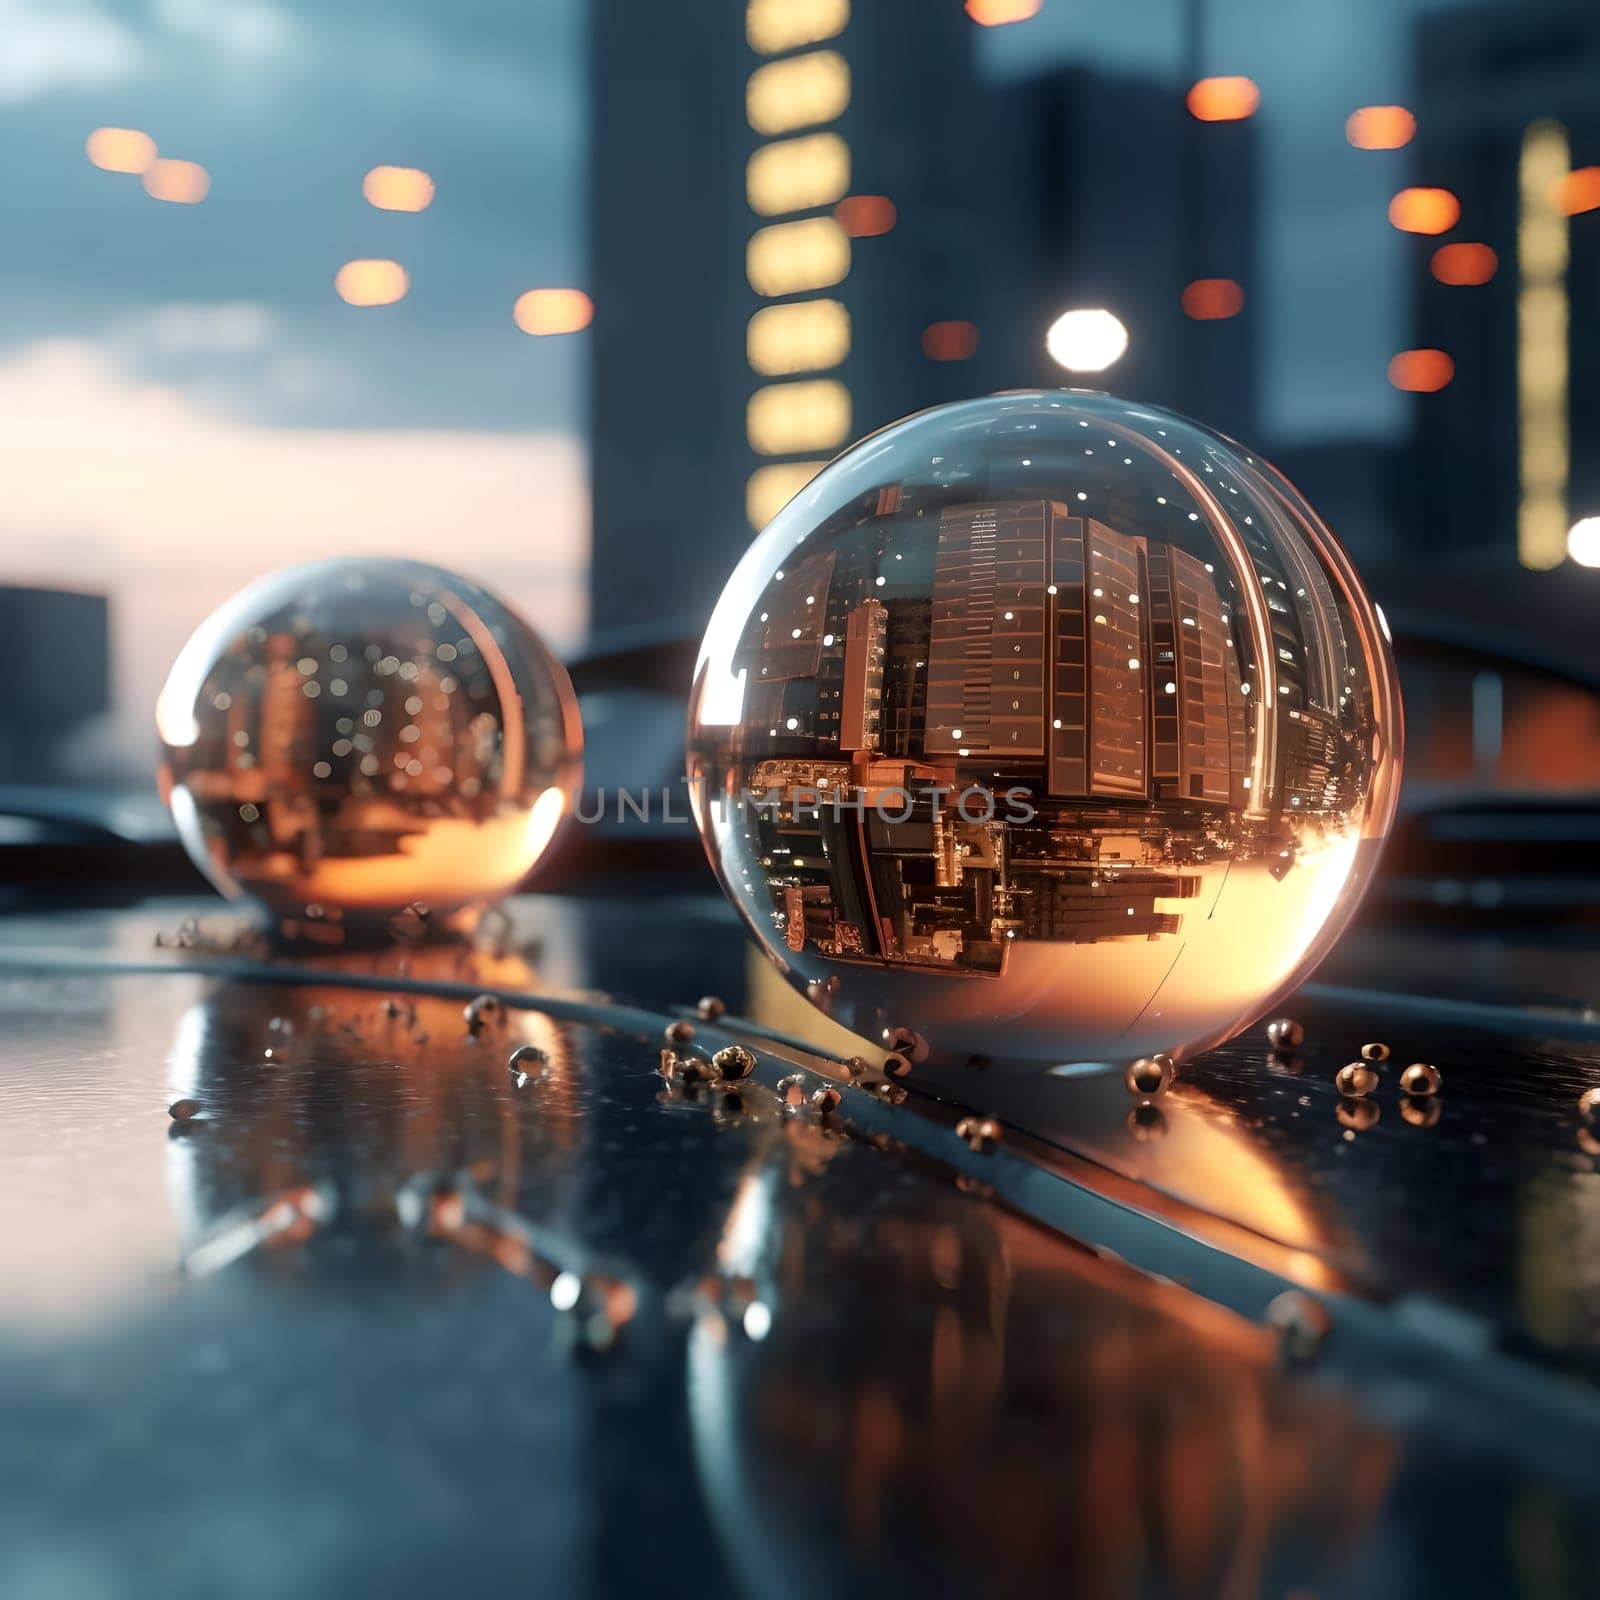 Two glass spheres on a dark reflective surface against the background of evening buildings